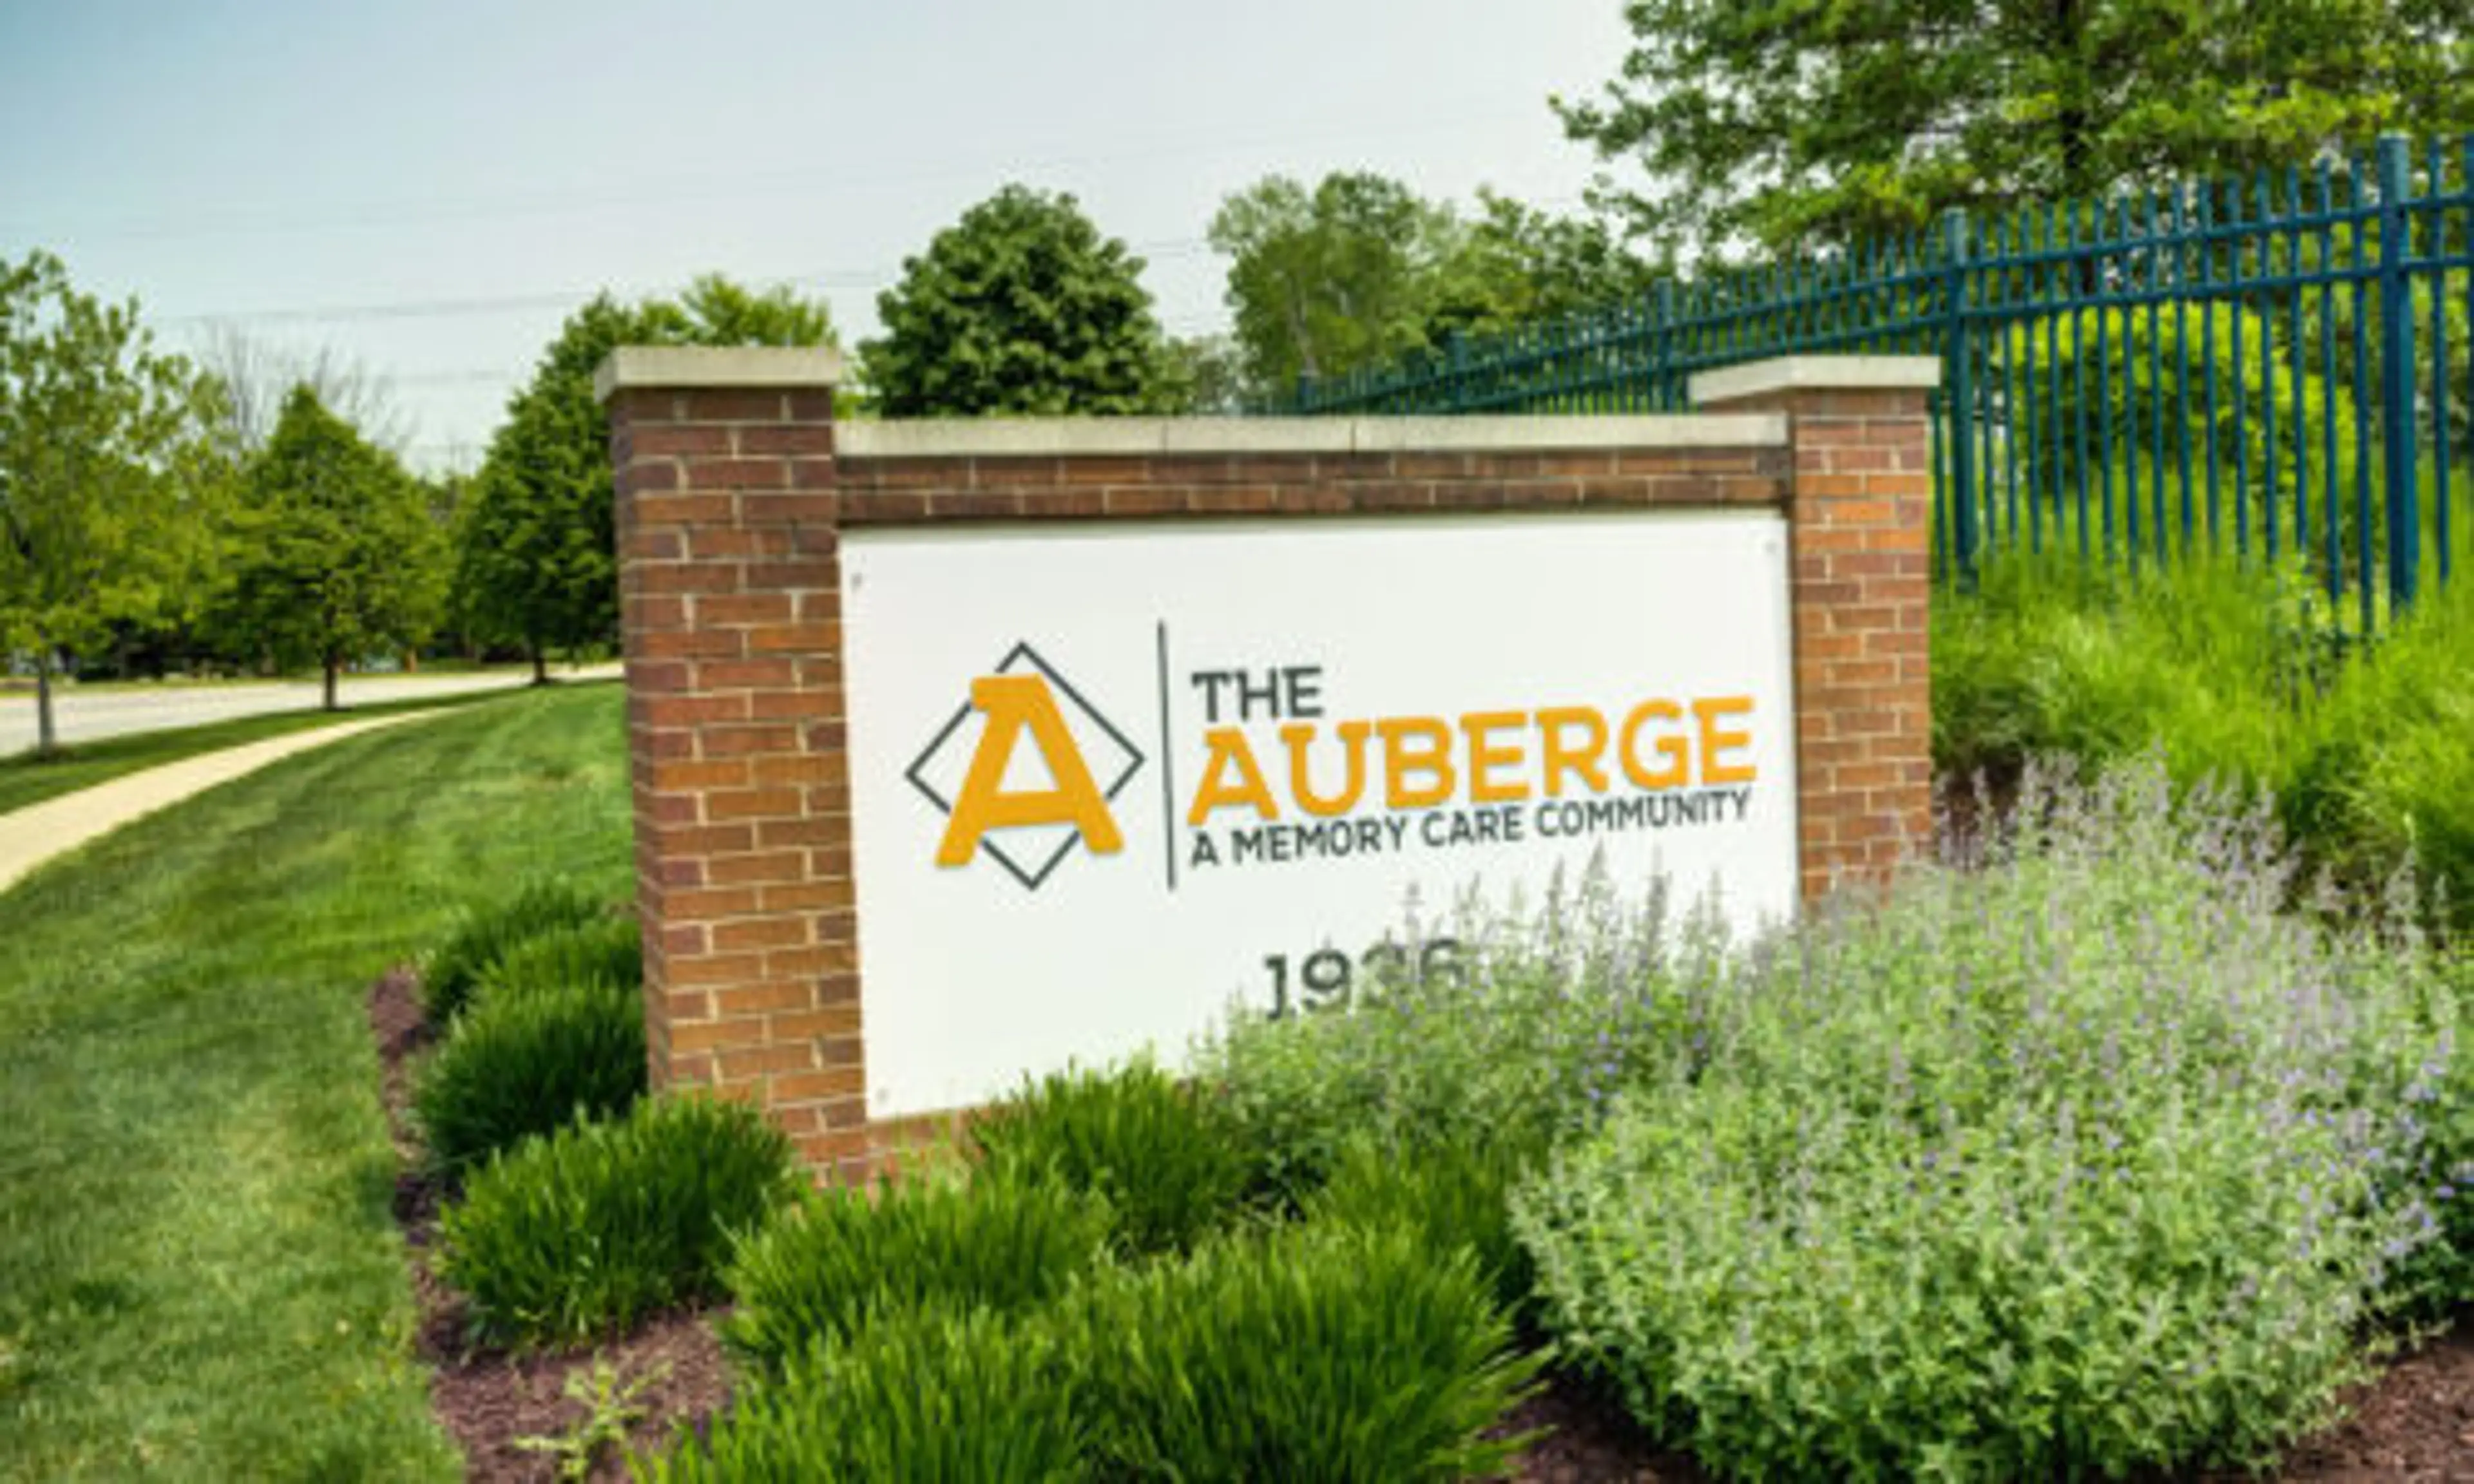 Auberge at Naperville Community Sign